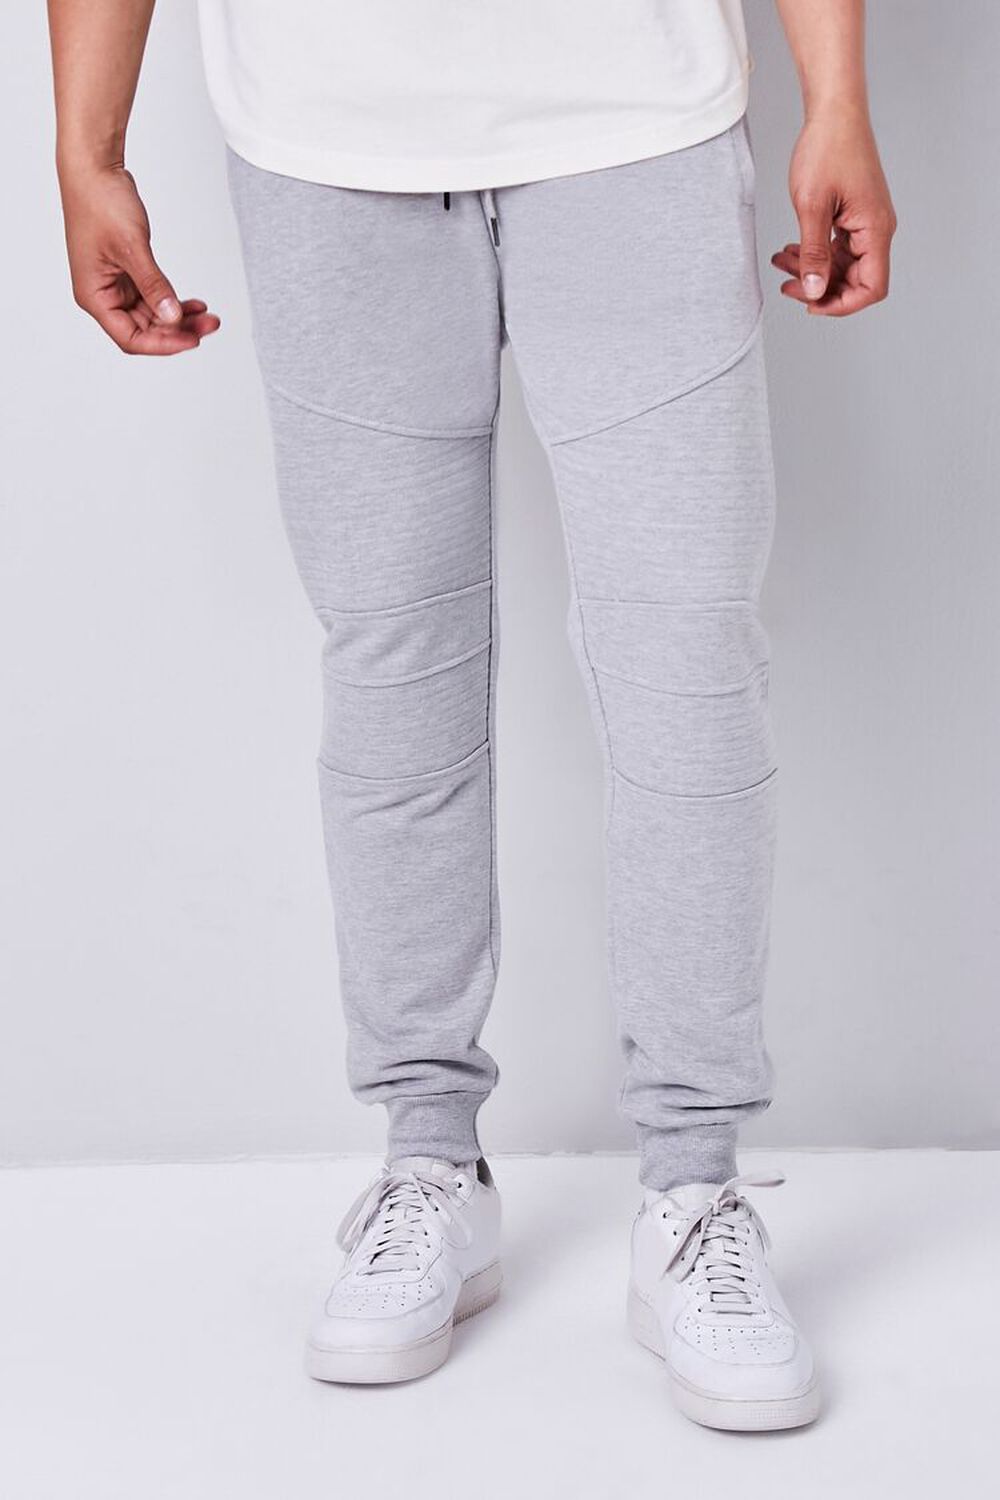 HEATHER GREY Heathered French Terry Moto Joggers, image 2